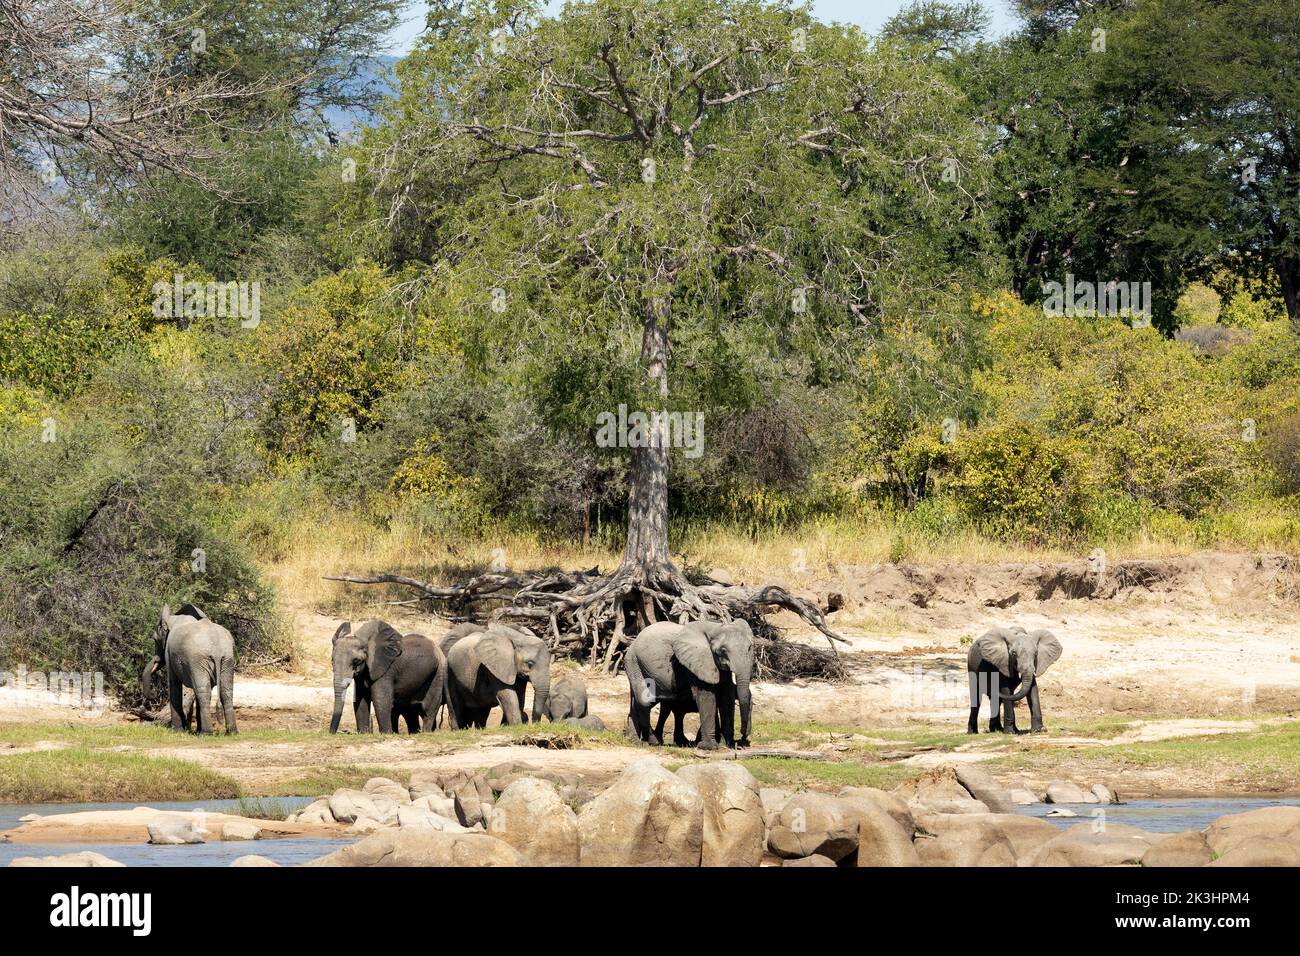 Elephants emerge from the drying bush to drink, wallow and socialise at the Great Ruaha River. The bush is drying out and changing to fall colours Stock Photo